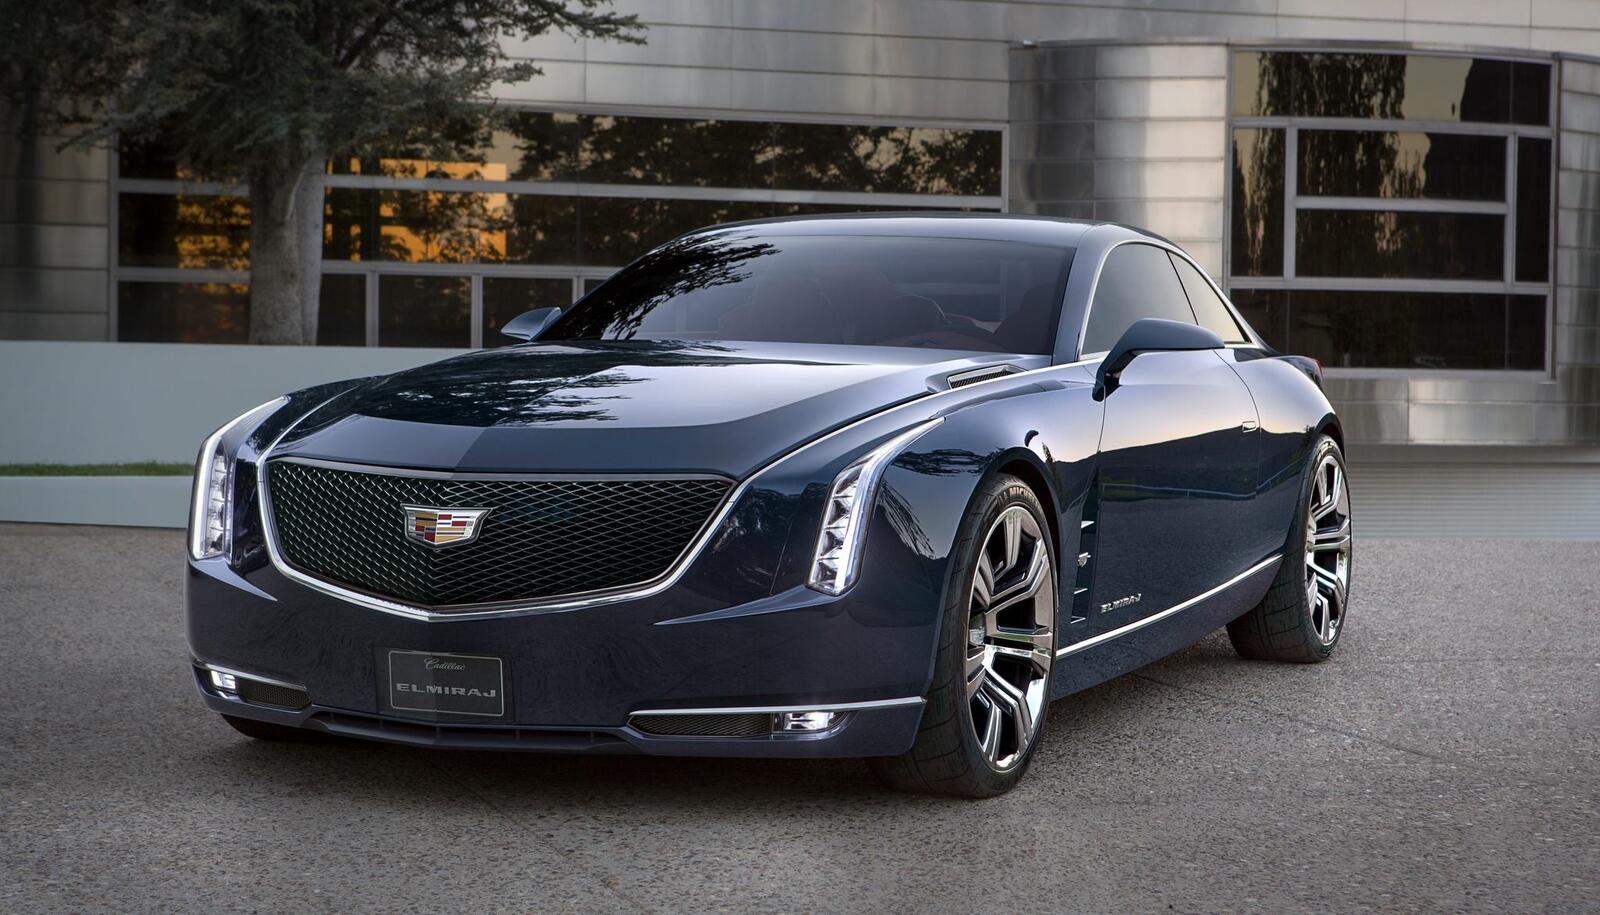 Wallpapers cadillac car cars on the desktop